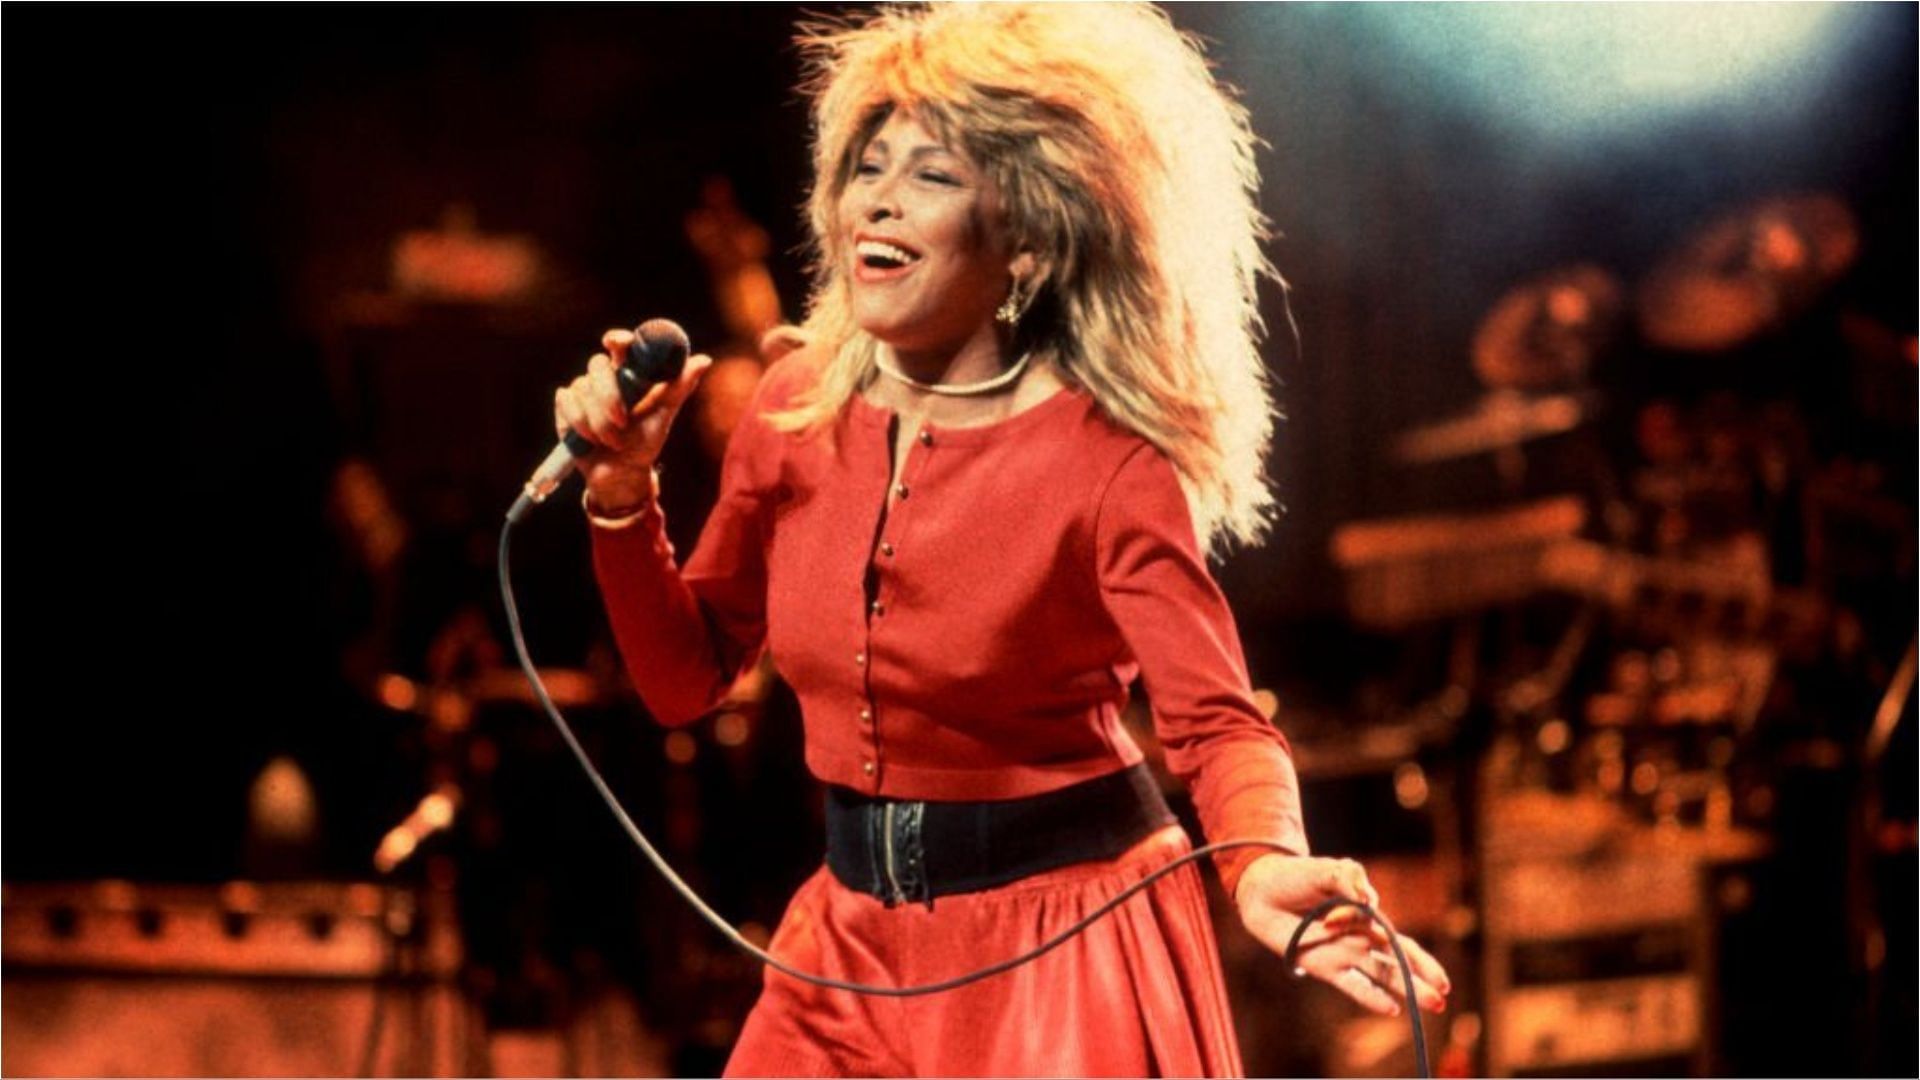 Tina Turner was 83 years old at the time of death (Image via Paul Natkin/Getty Images)